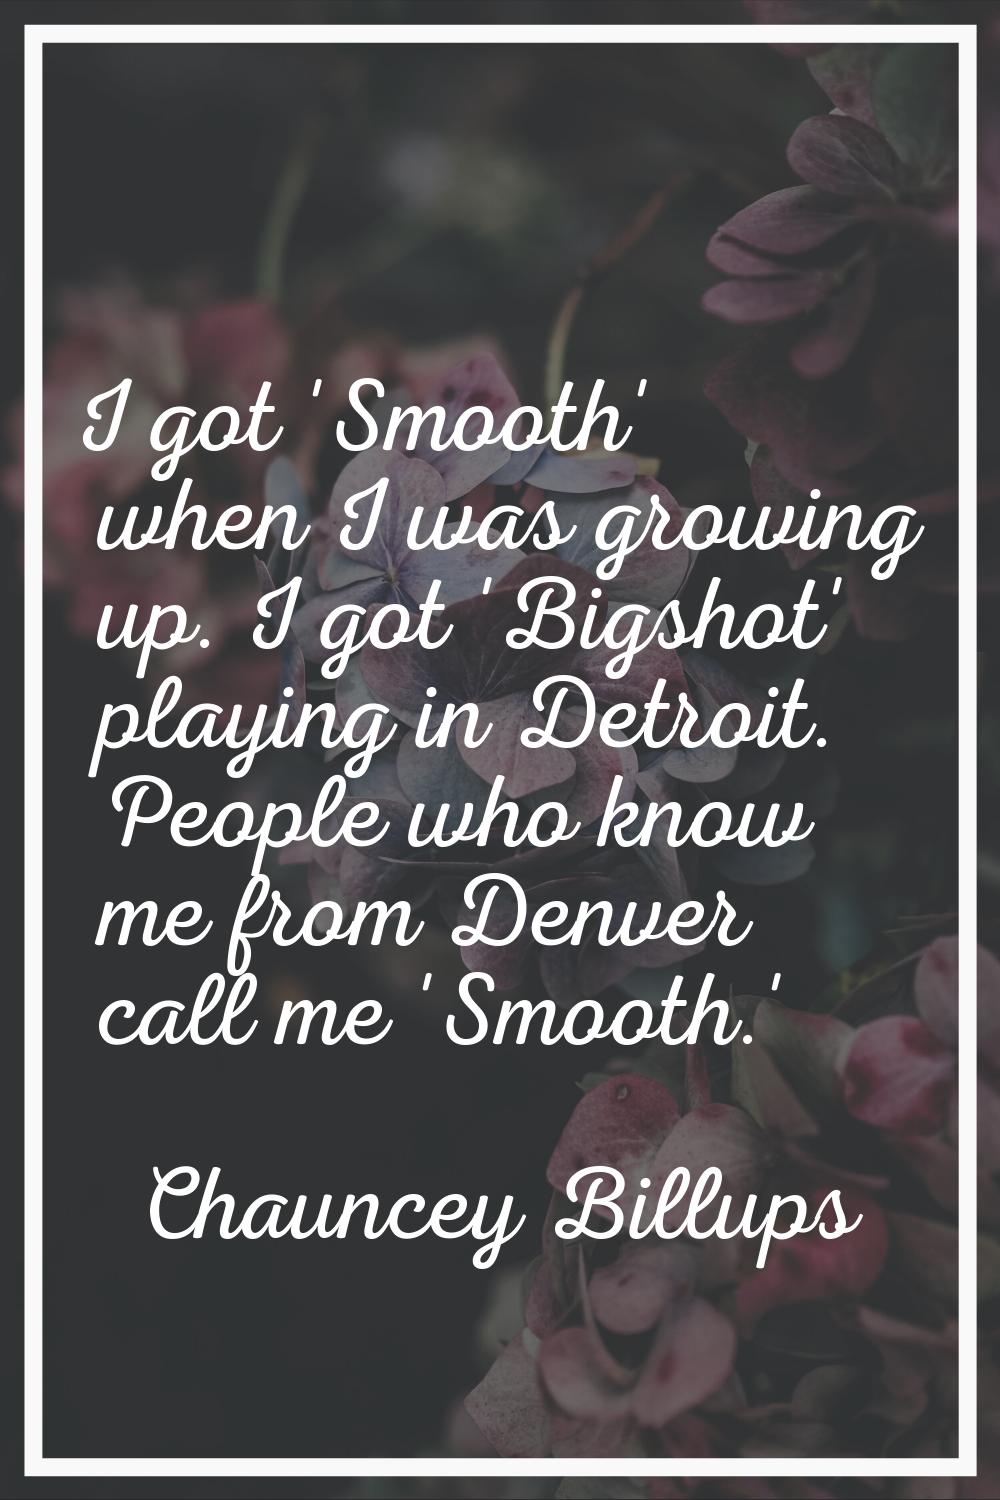 I got 'Smooth' when I was growing up. I got 'Bigshot' playing in Detroit. People who know me from D